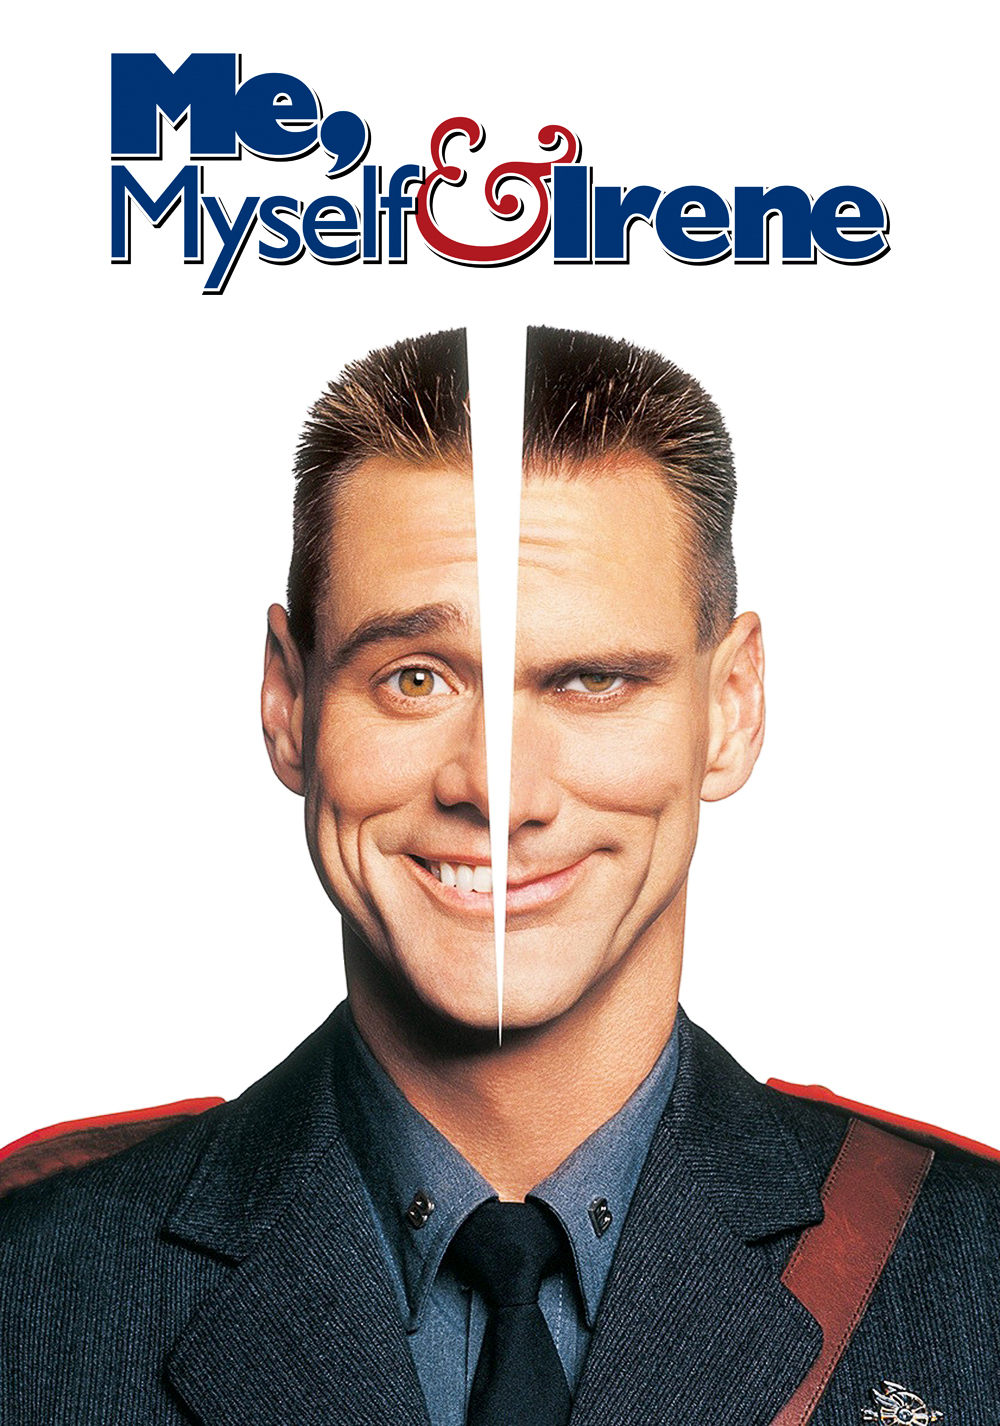 View, Download, Rate, and Comment on this Me, Myself & Irene Movie ...